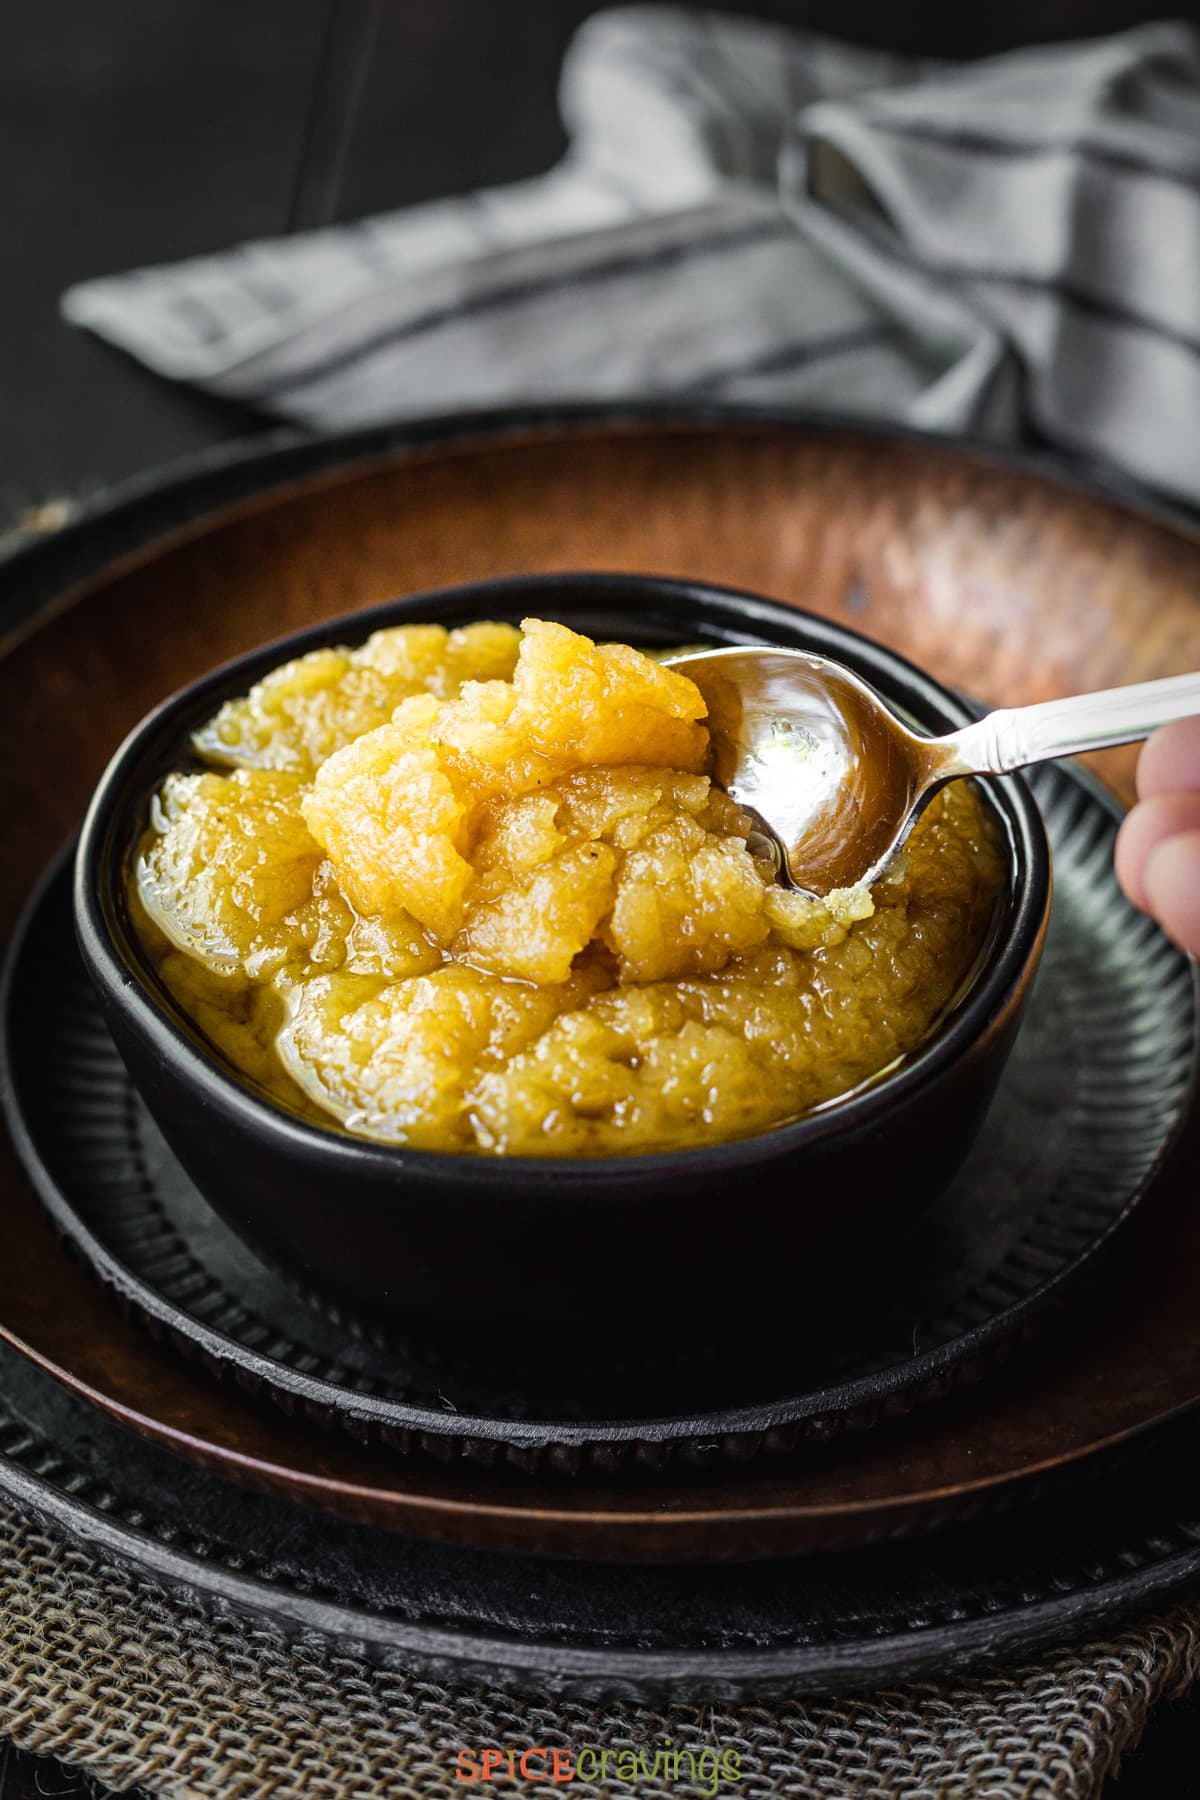 Spoon lifting halwa from a black bowl